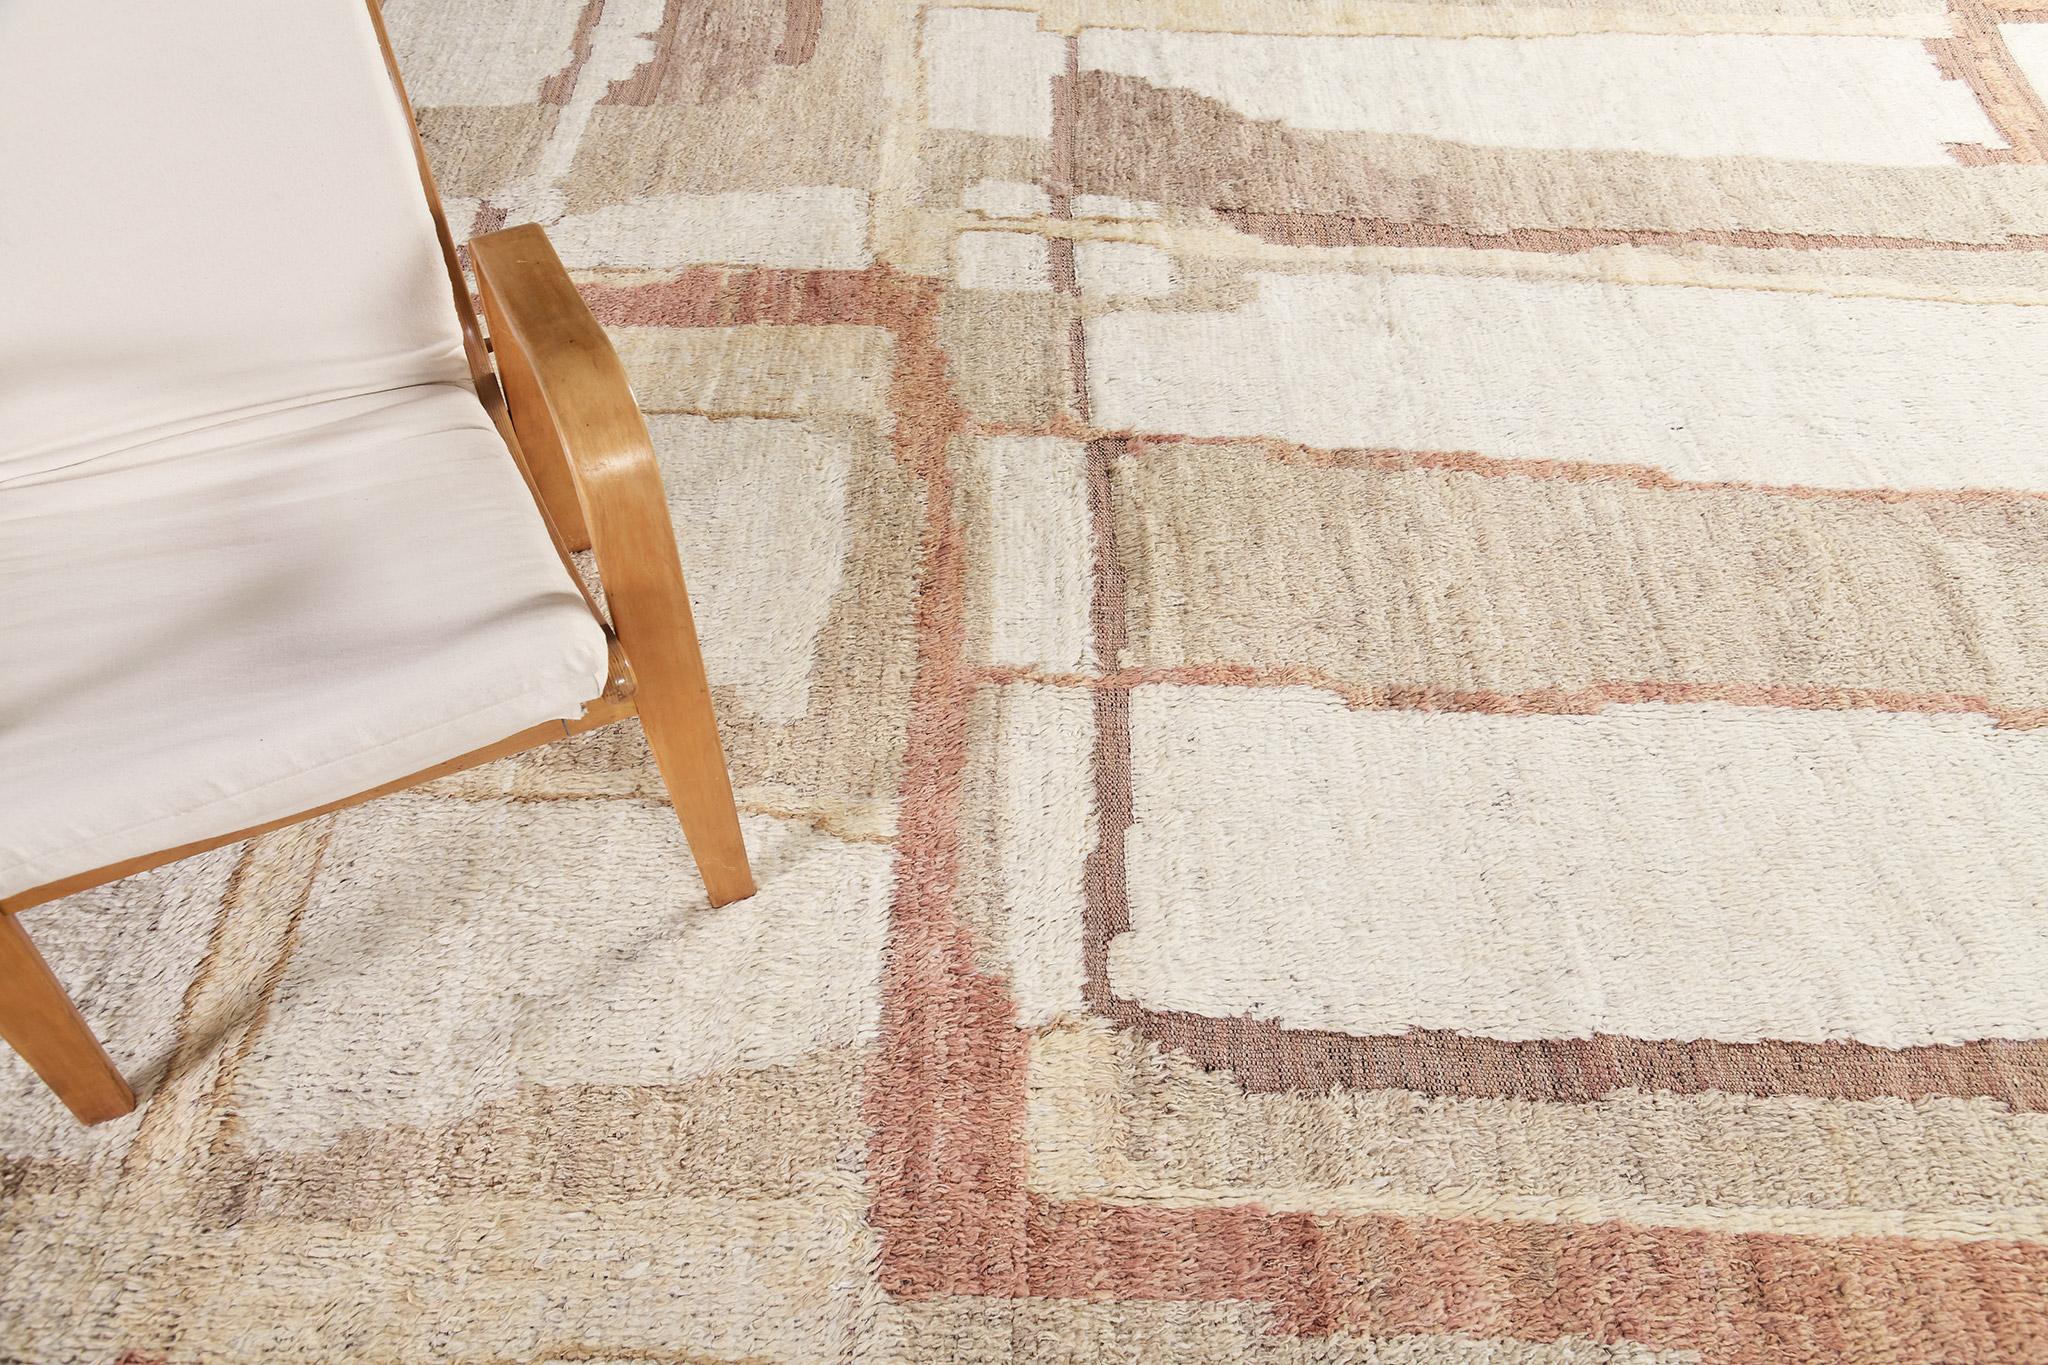 Aziza is a warm and lustrous wool rug with a unique play of colors and irregular shapes. This pile weave has natural-toned embossed textures and unique tassel detailing which makes this piece highly sought after. Mehraban's Atlas collection is noted